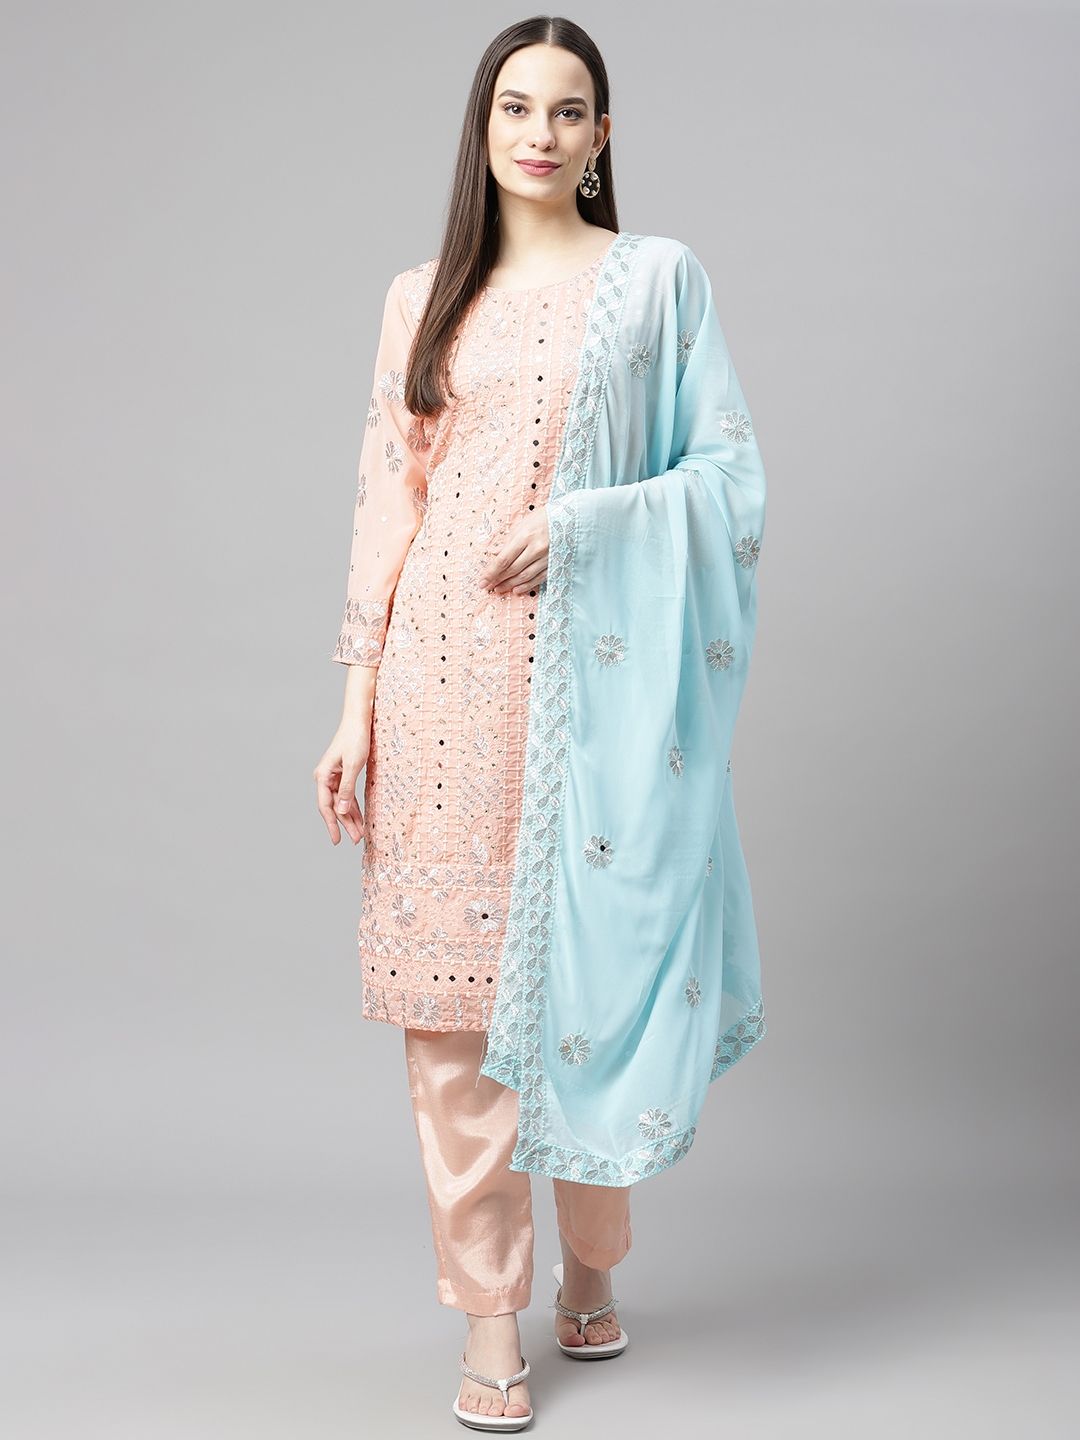 Readiprint Fashions Peach-Coloured & Blue Embroidered Unstitched Dress Material Price in India